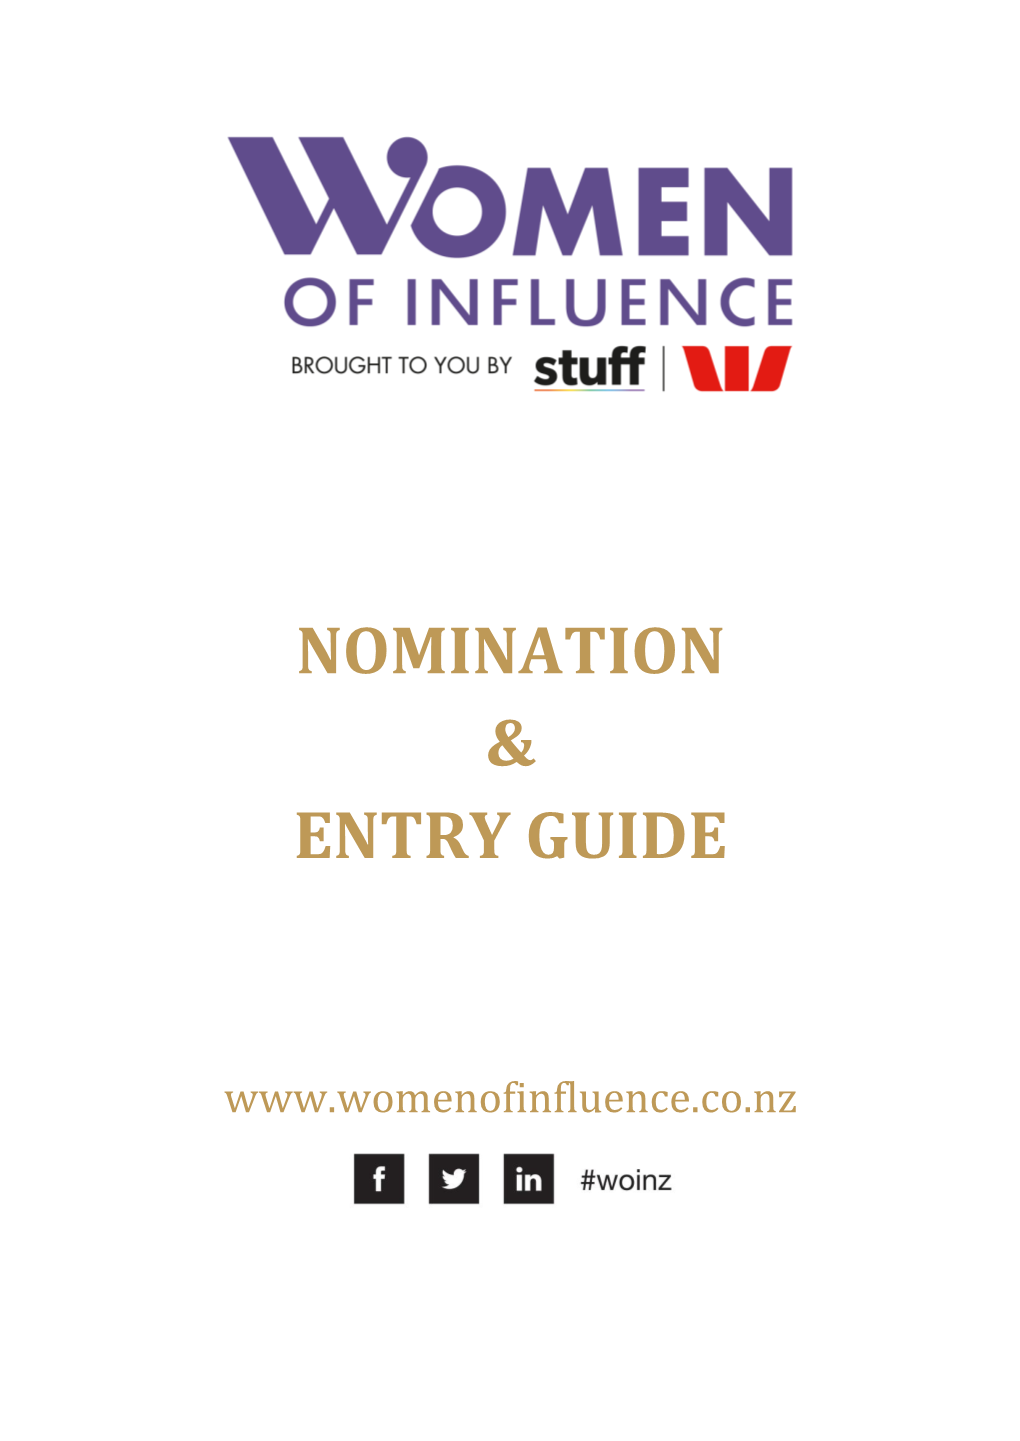 Nomination & Entry Guide